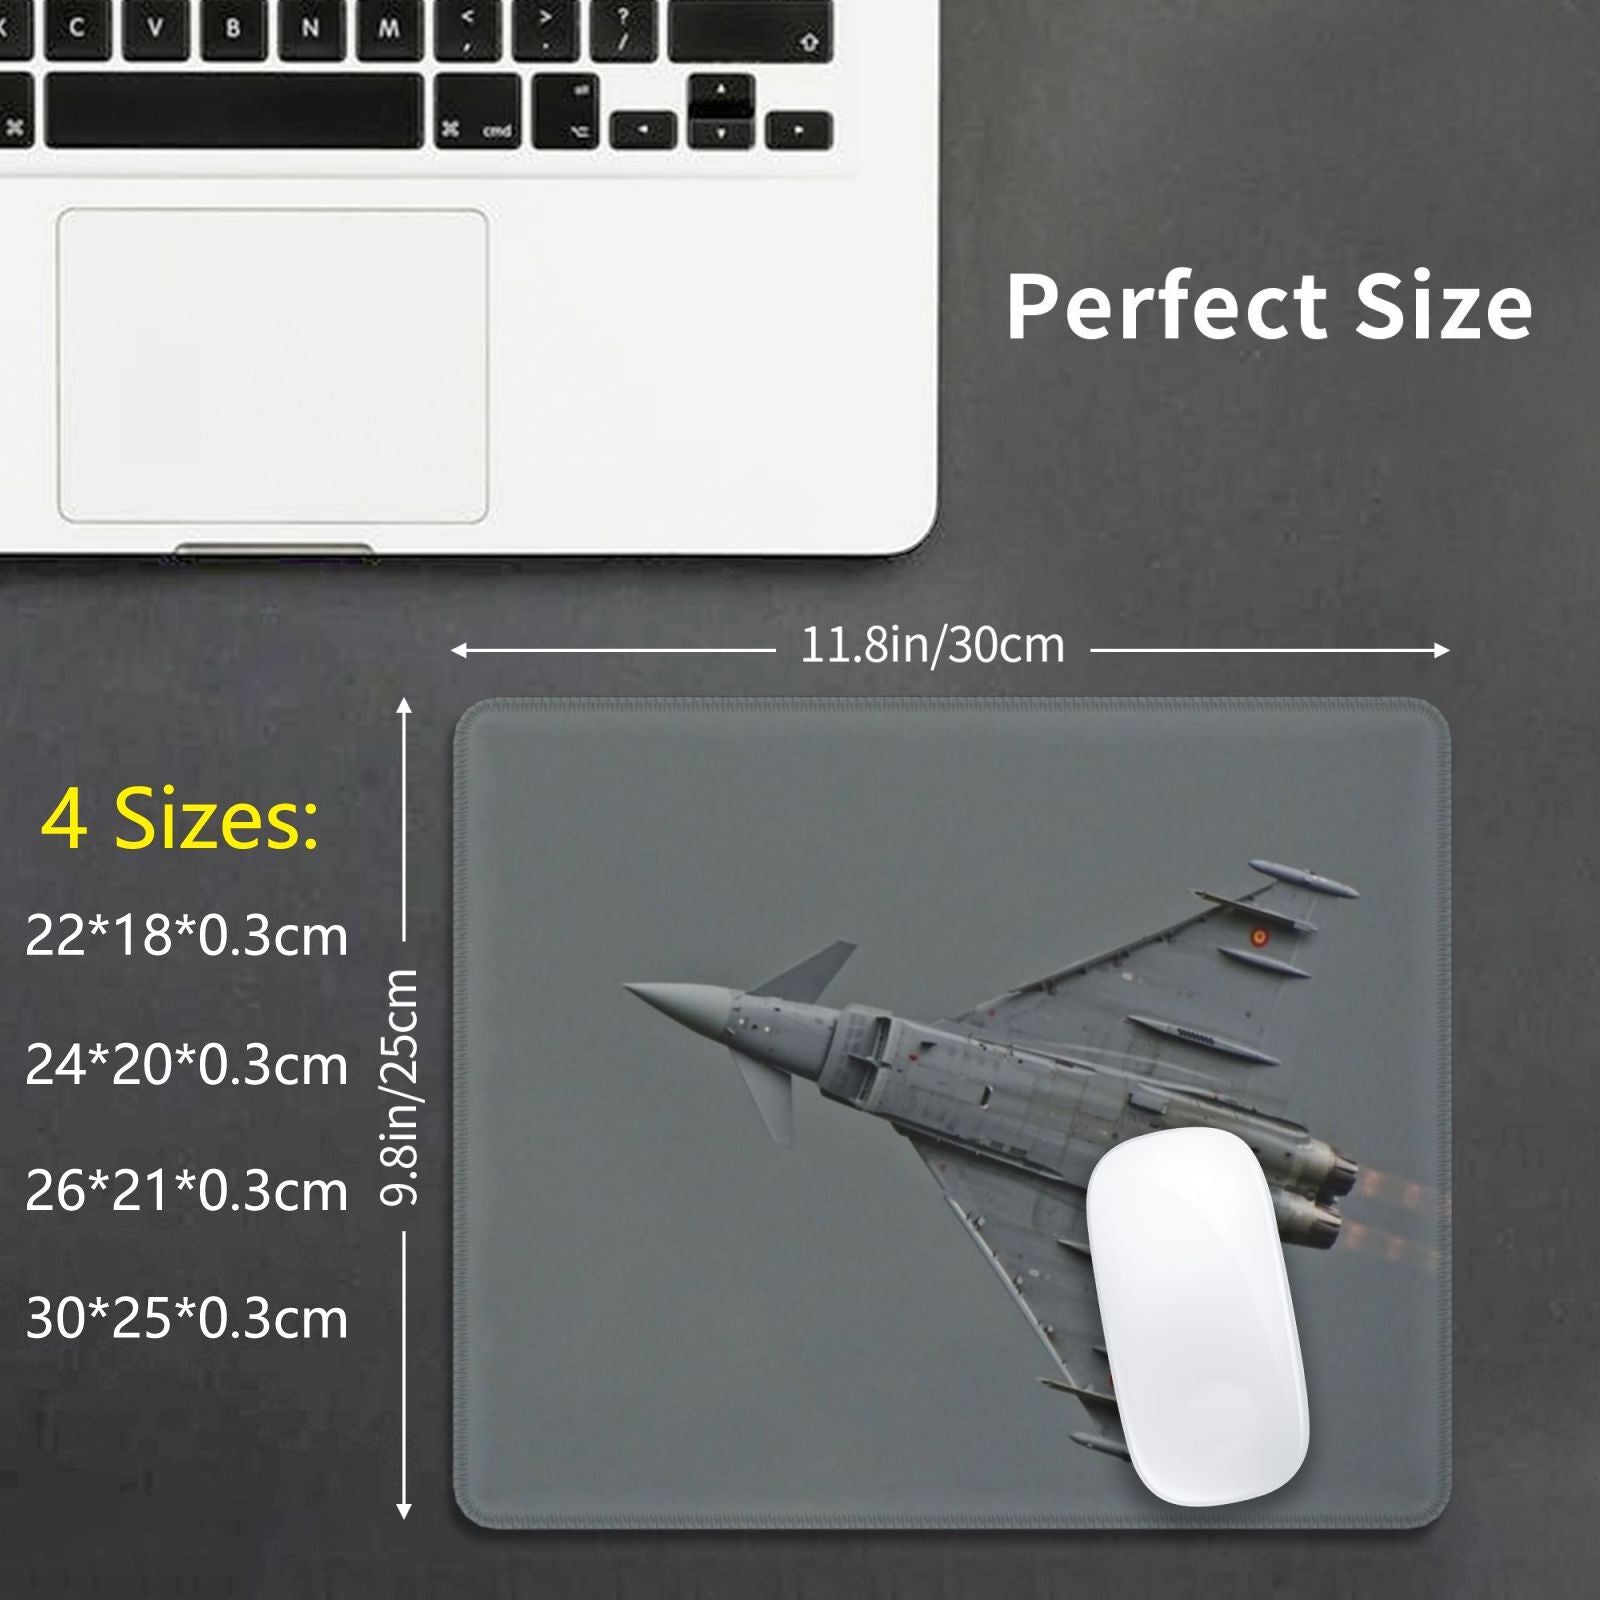 Make Some Noise Mouse Pad DIY Print Typhoon Eurofighter Jet Spanish Air Force Military Aviation Airshow